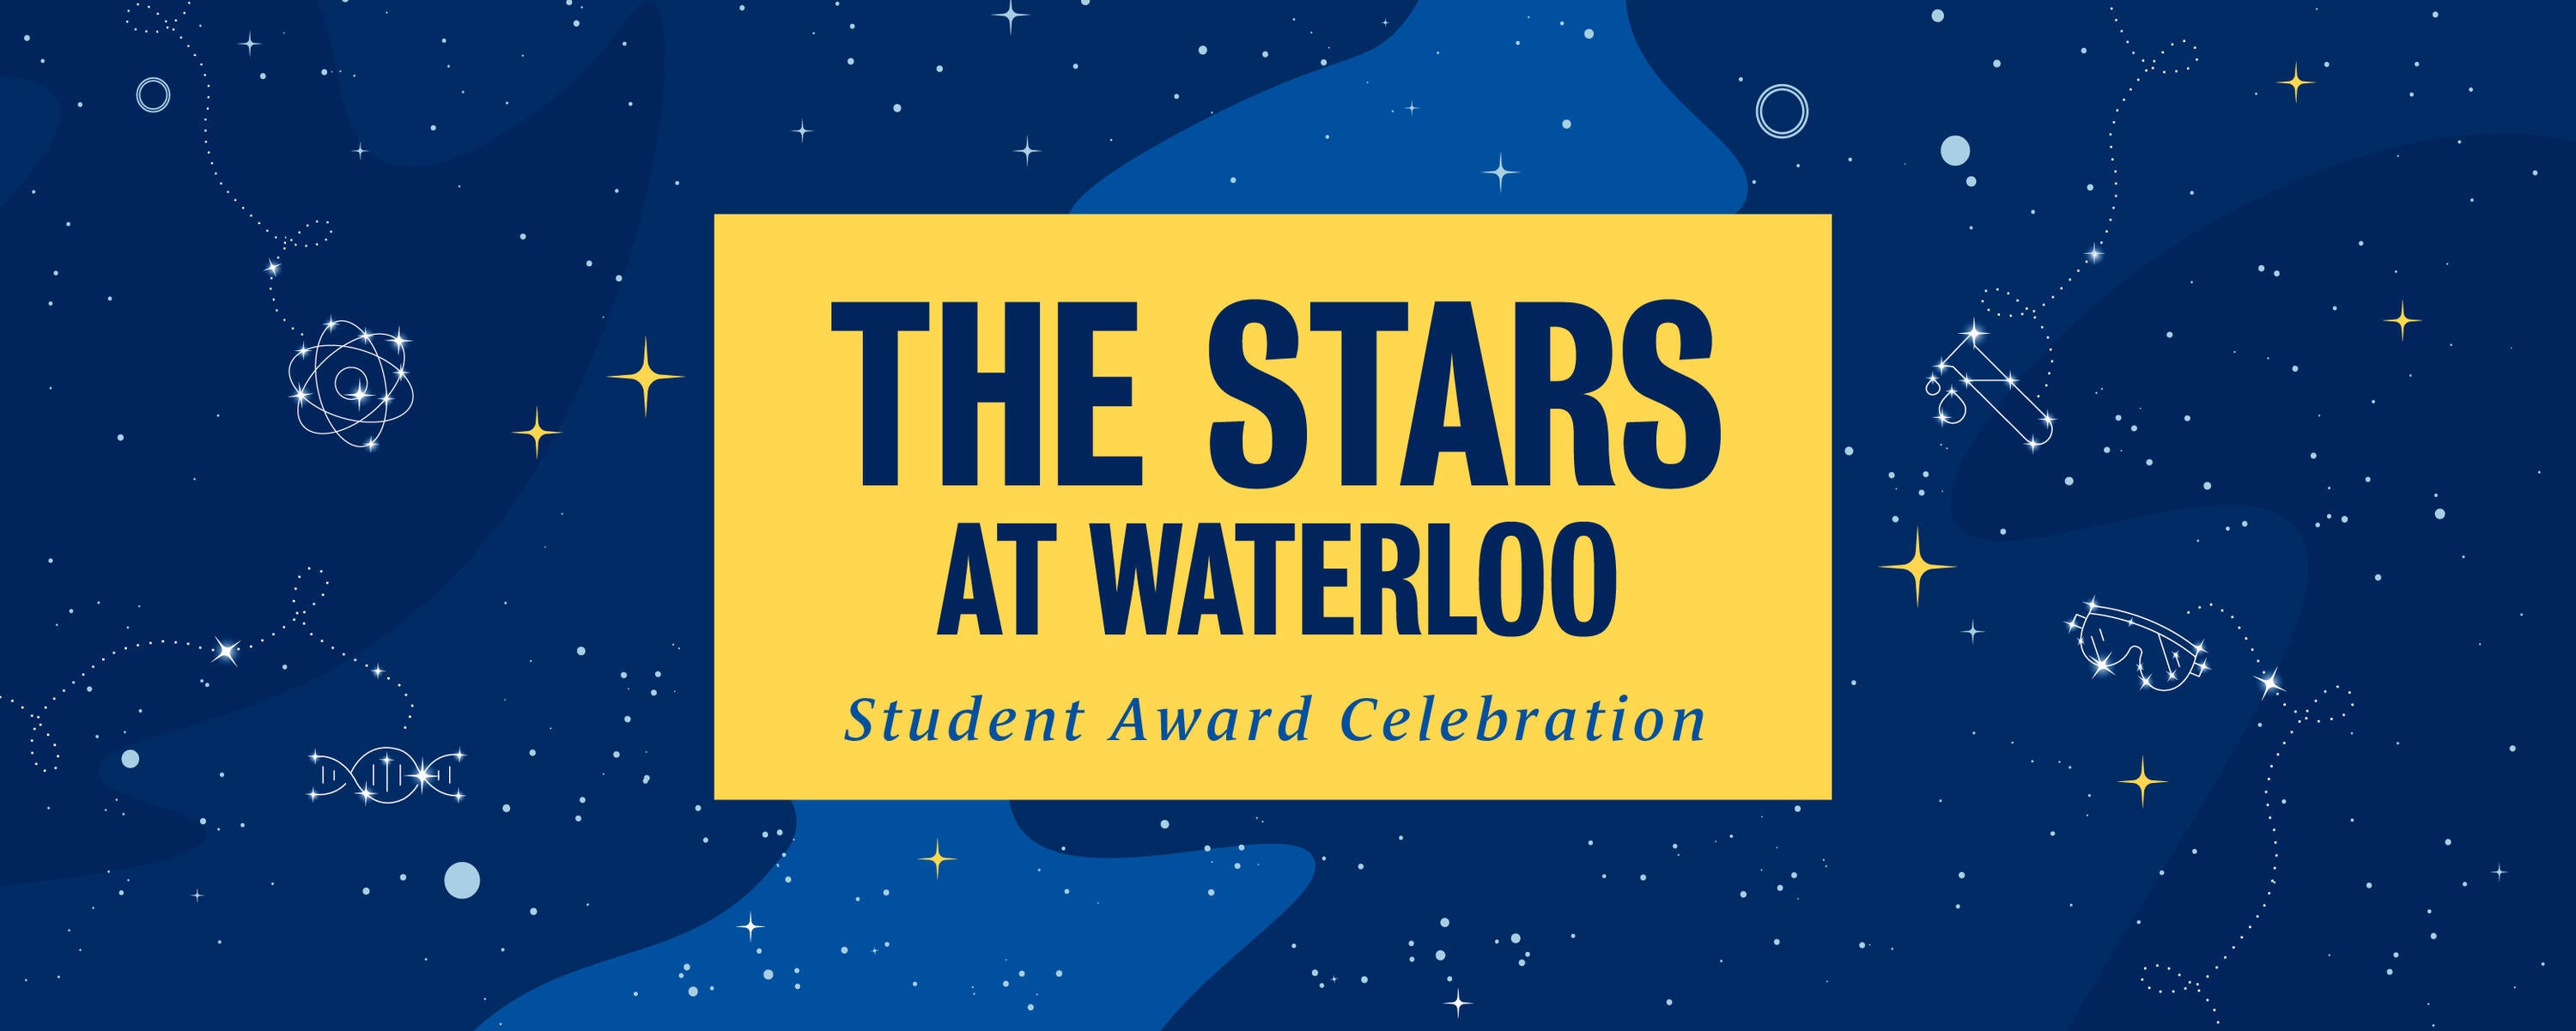 The Stars at Waterloo event banner